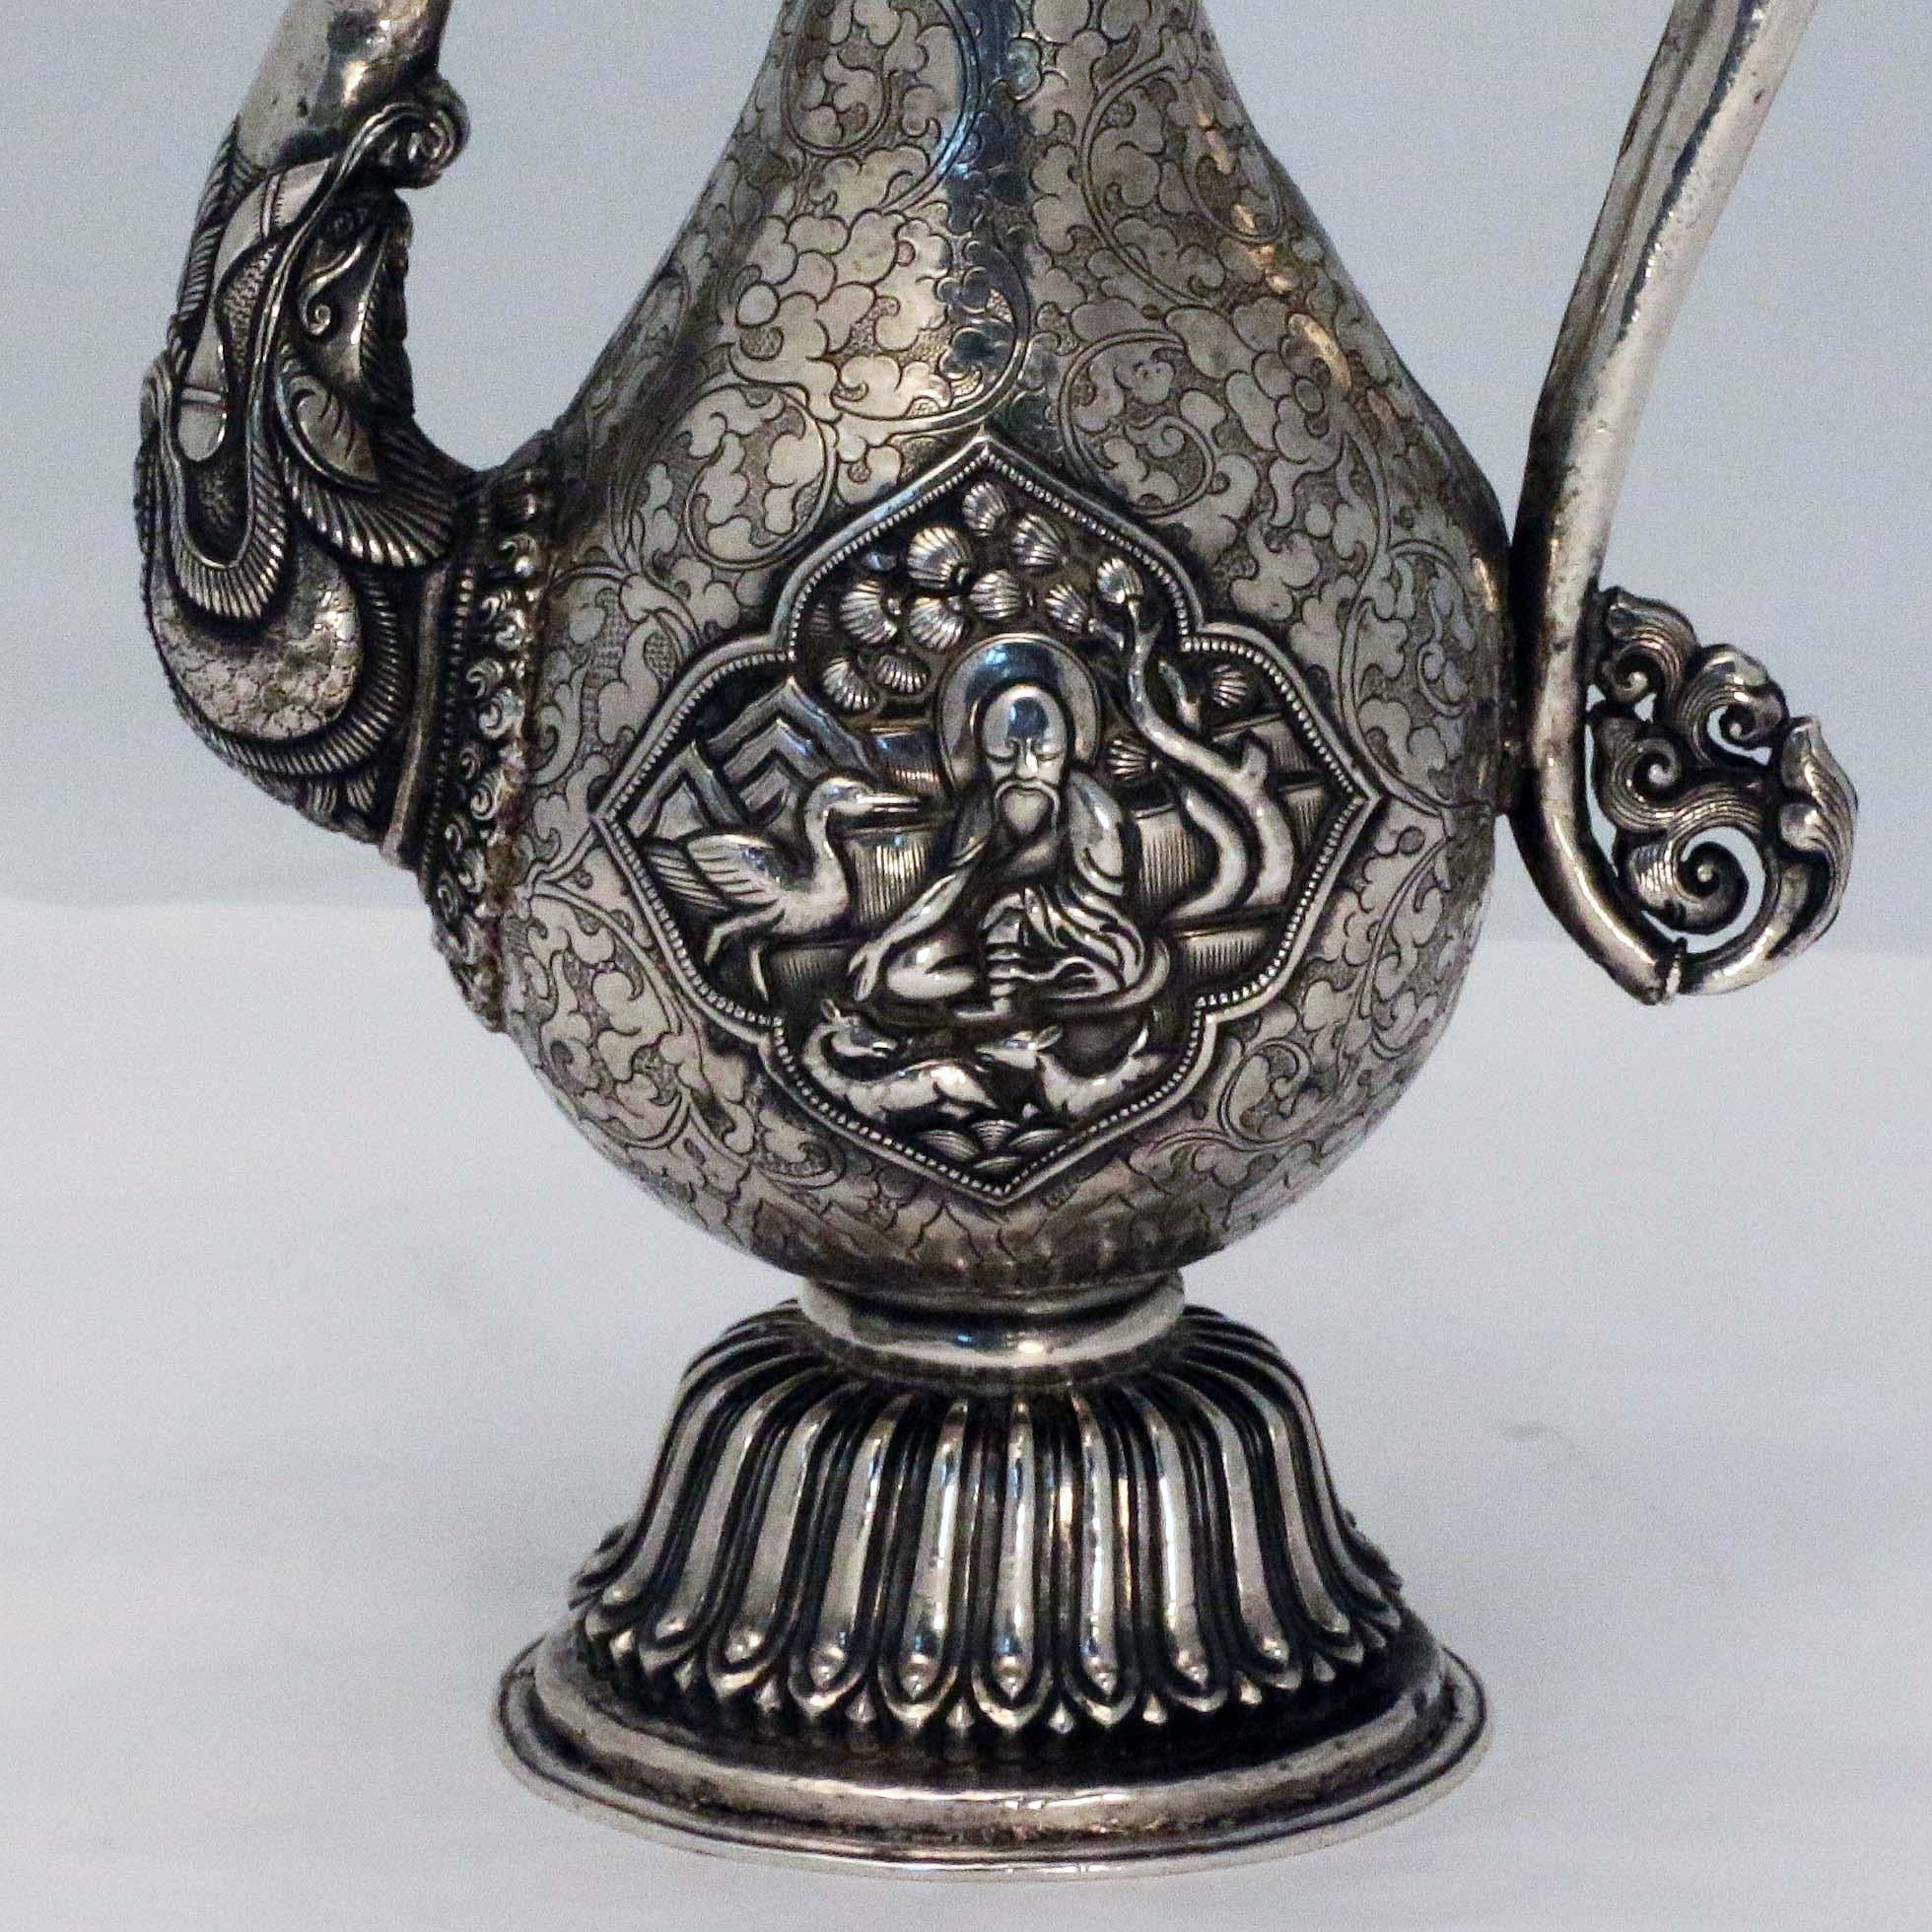 Antique Tibetan Silver Ceremonial Ewer In Good Condition For Sale In Montreal, QC